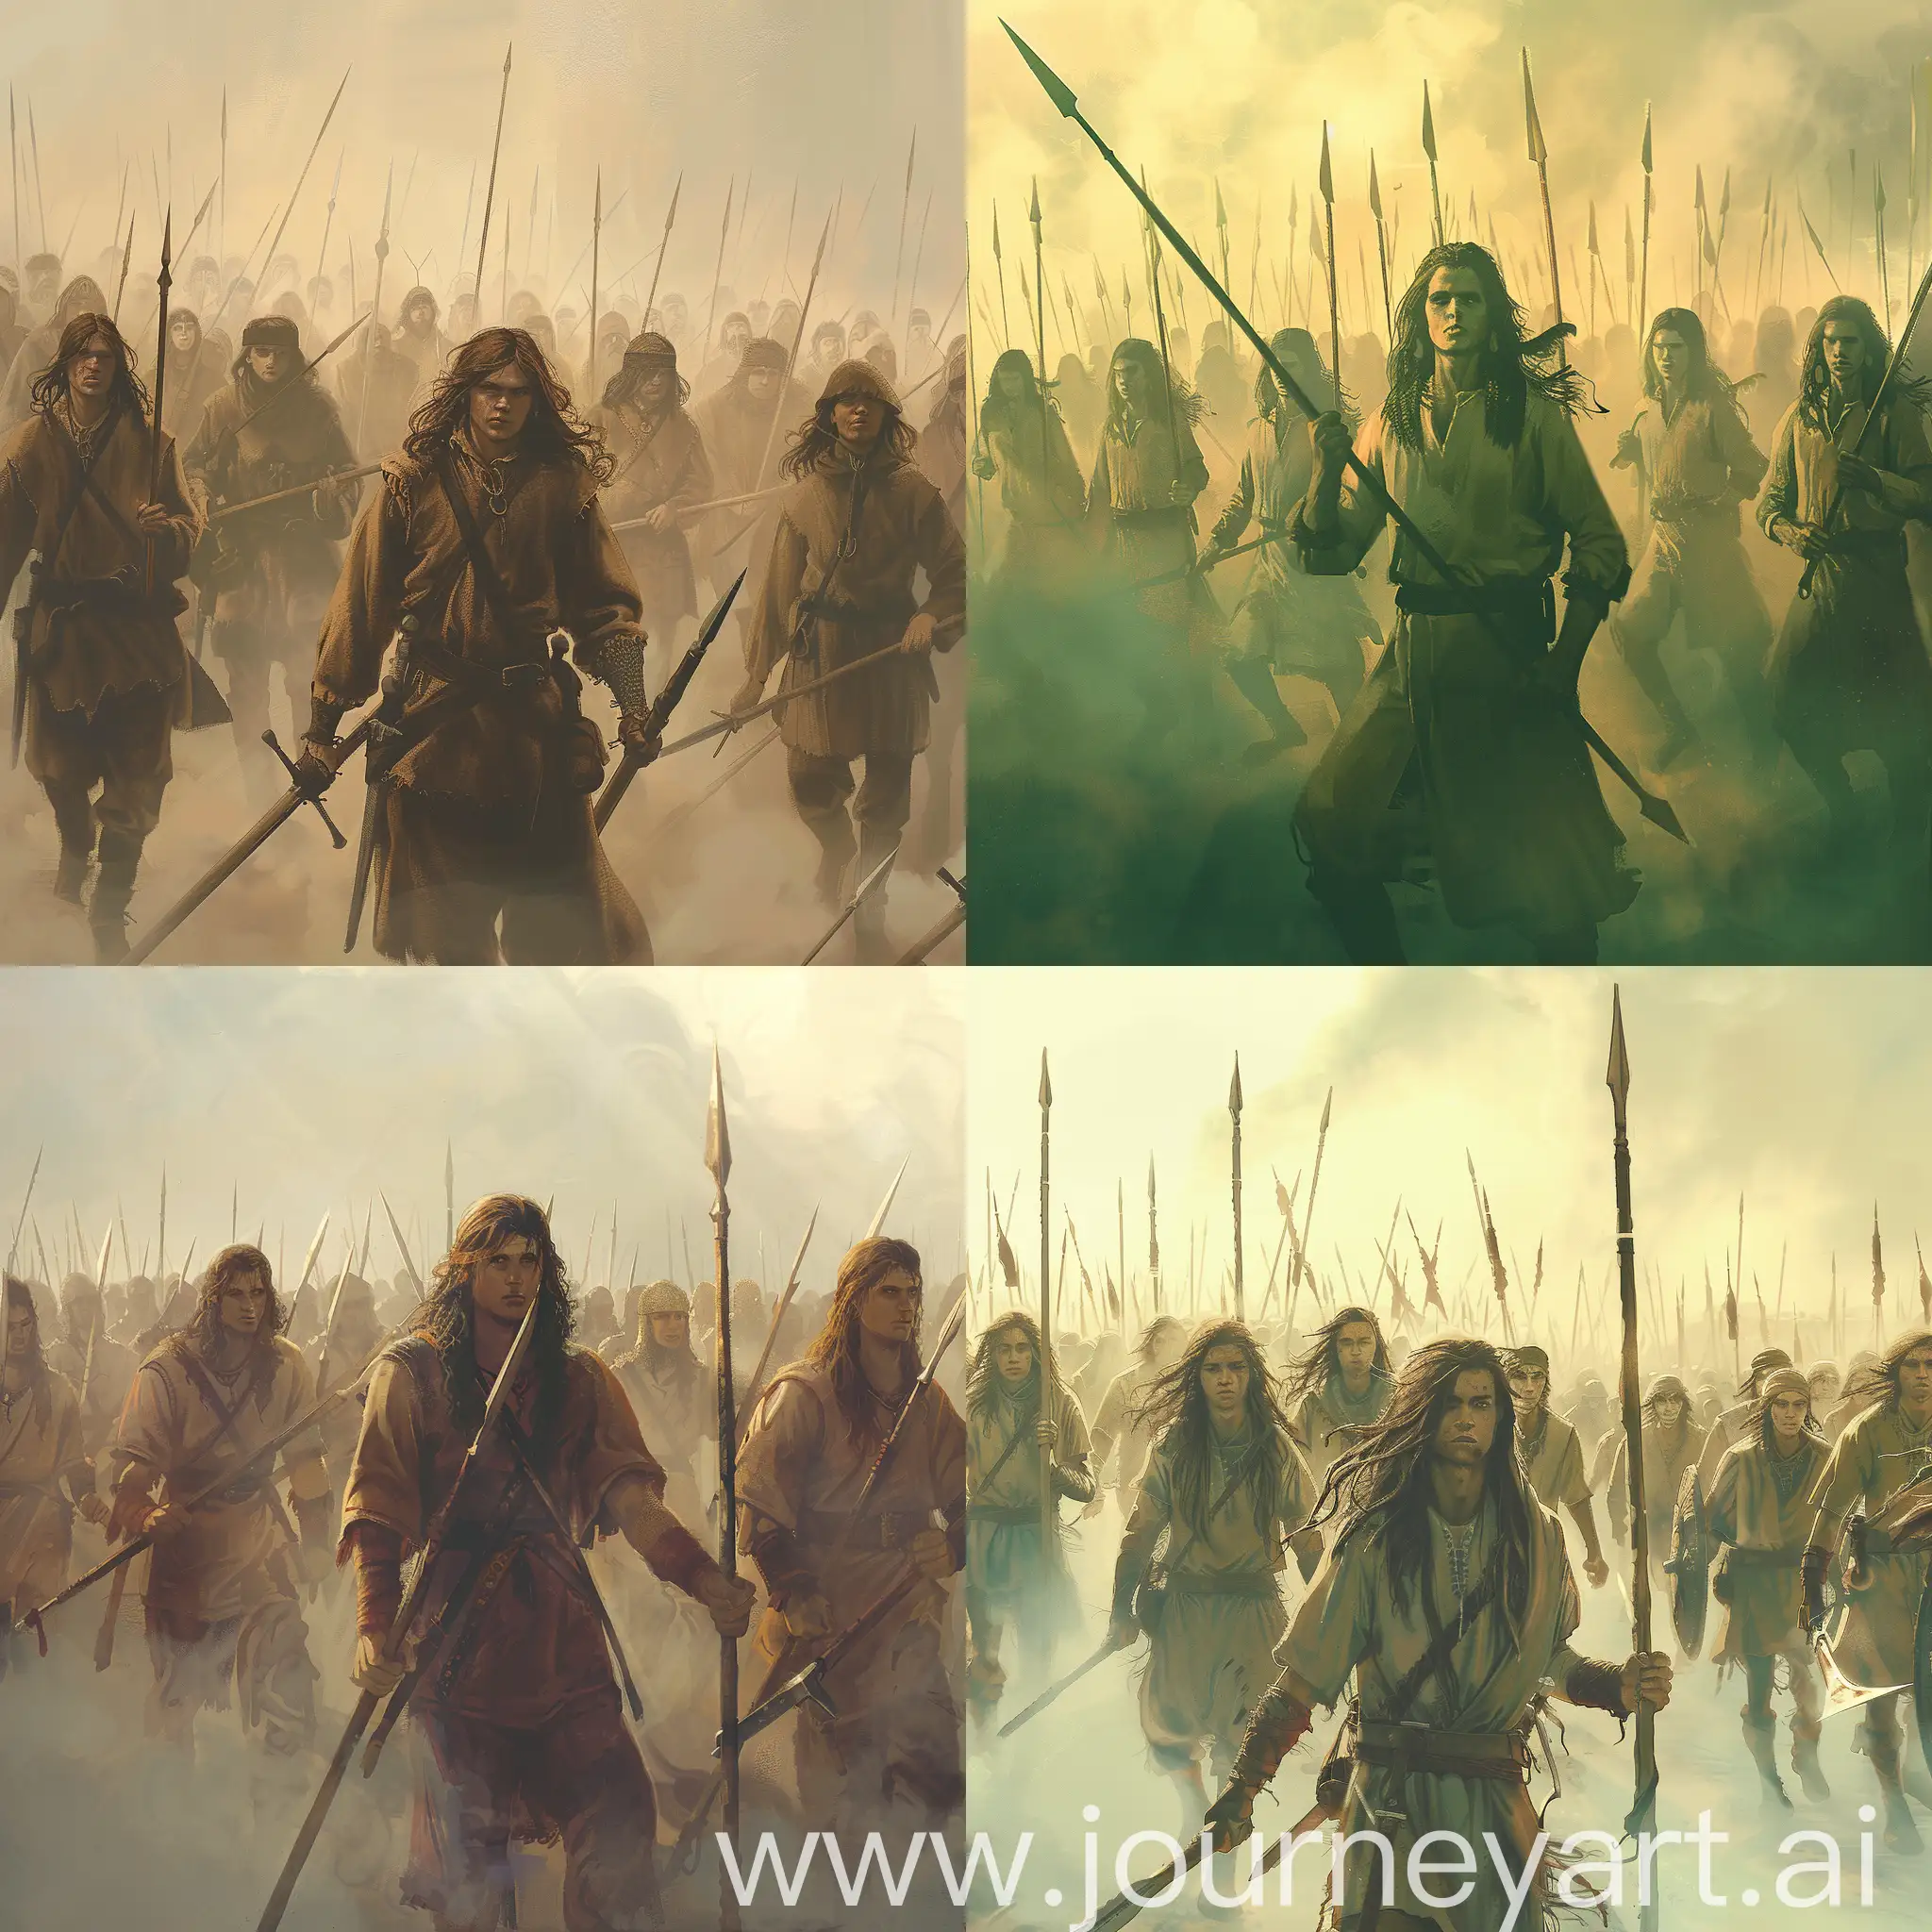 Medieval-Peasant-Army-Marching-Through-Misty-Landscape-with-Spears-Crusader-Kings-3-Style-Art